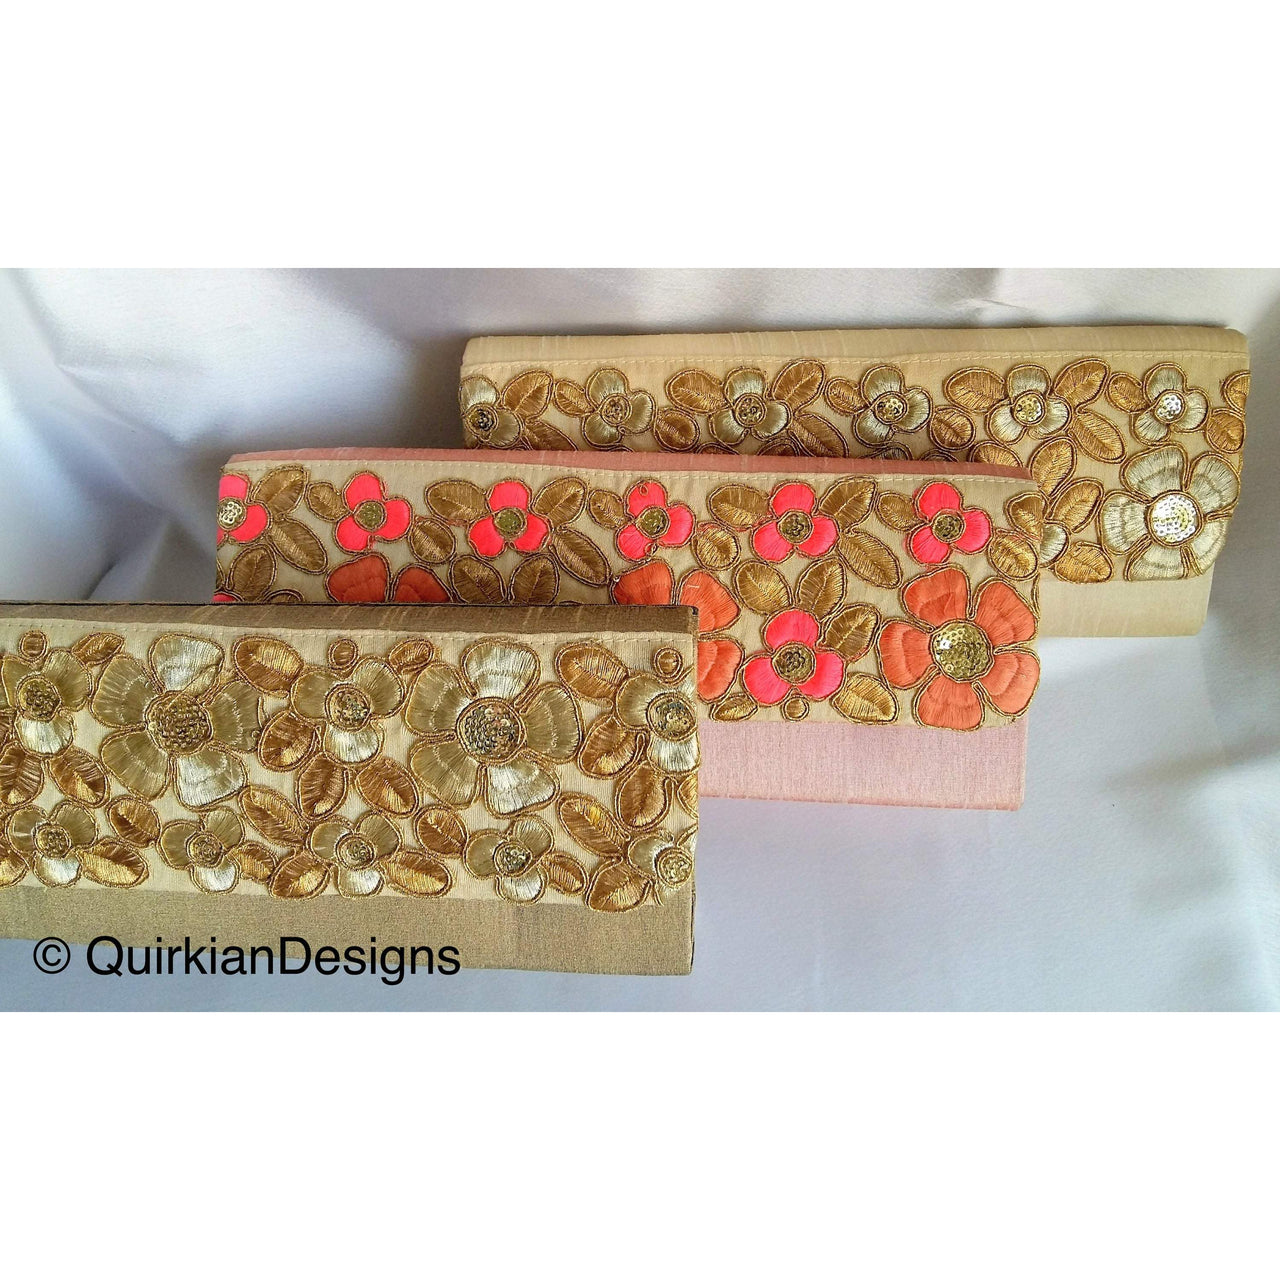 Green Fabric Clutch Purse With Copper And Gold Intricate Floral Embroidery, Wedding Clutch, Party Bag